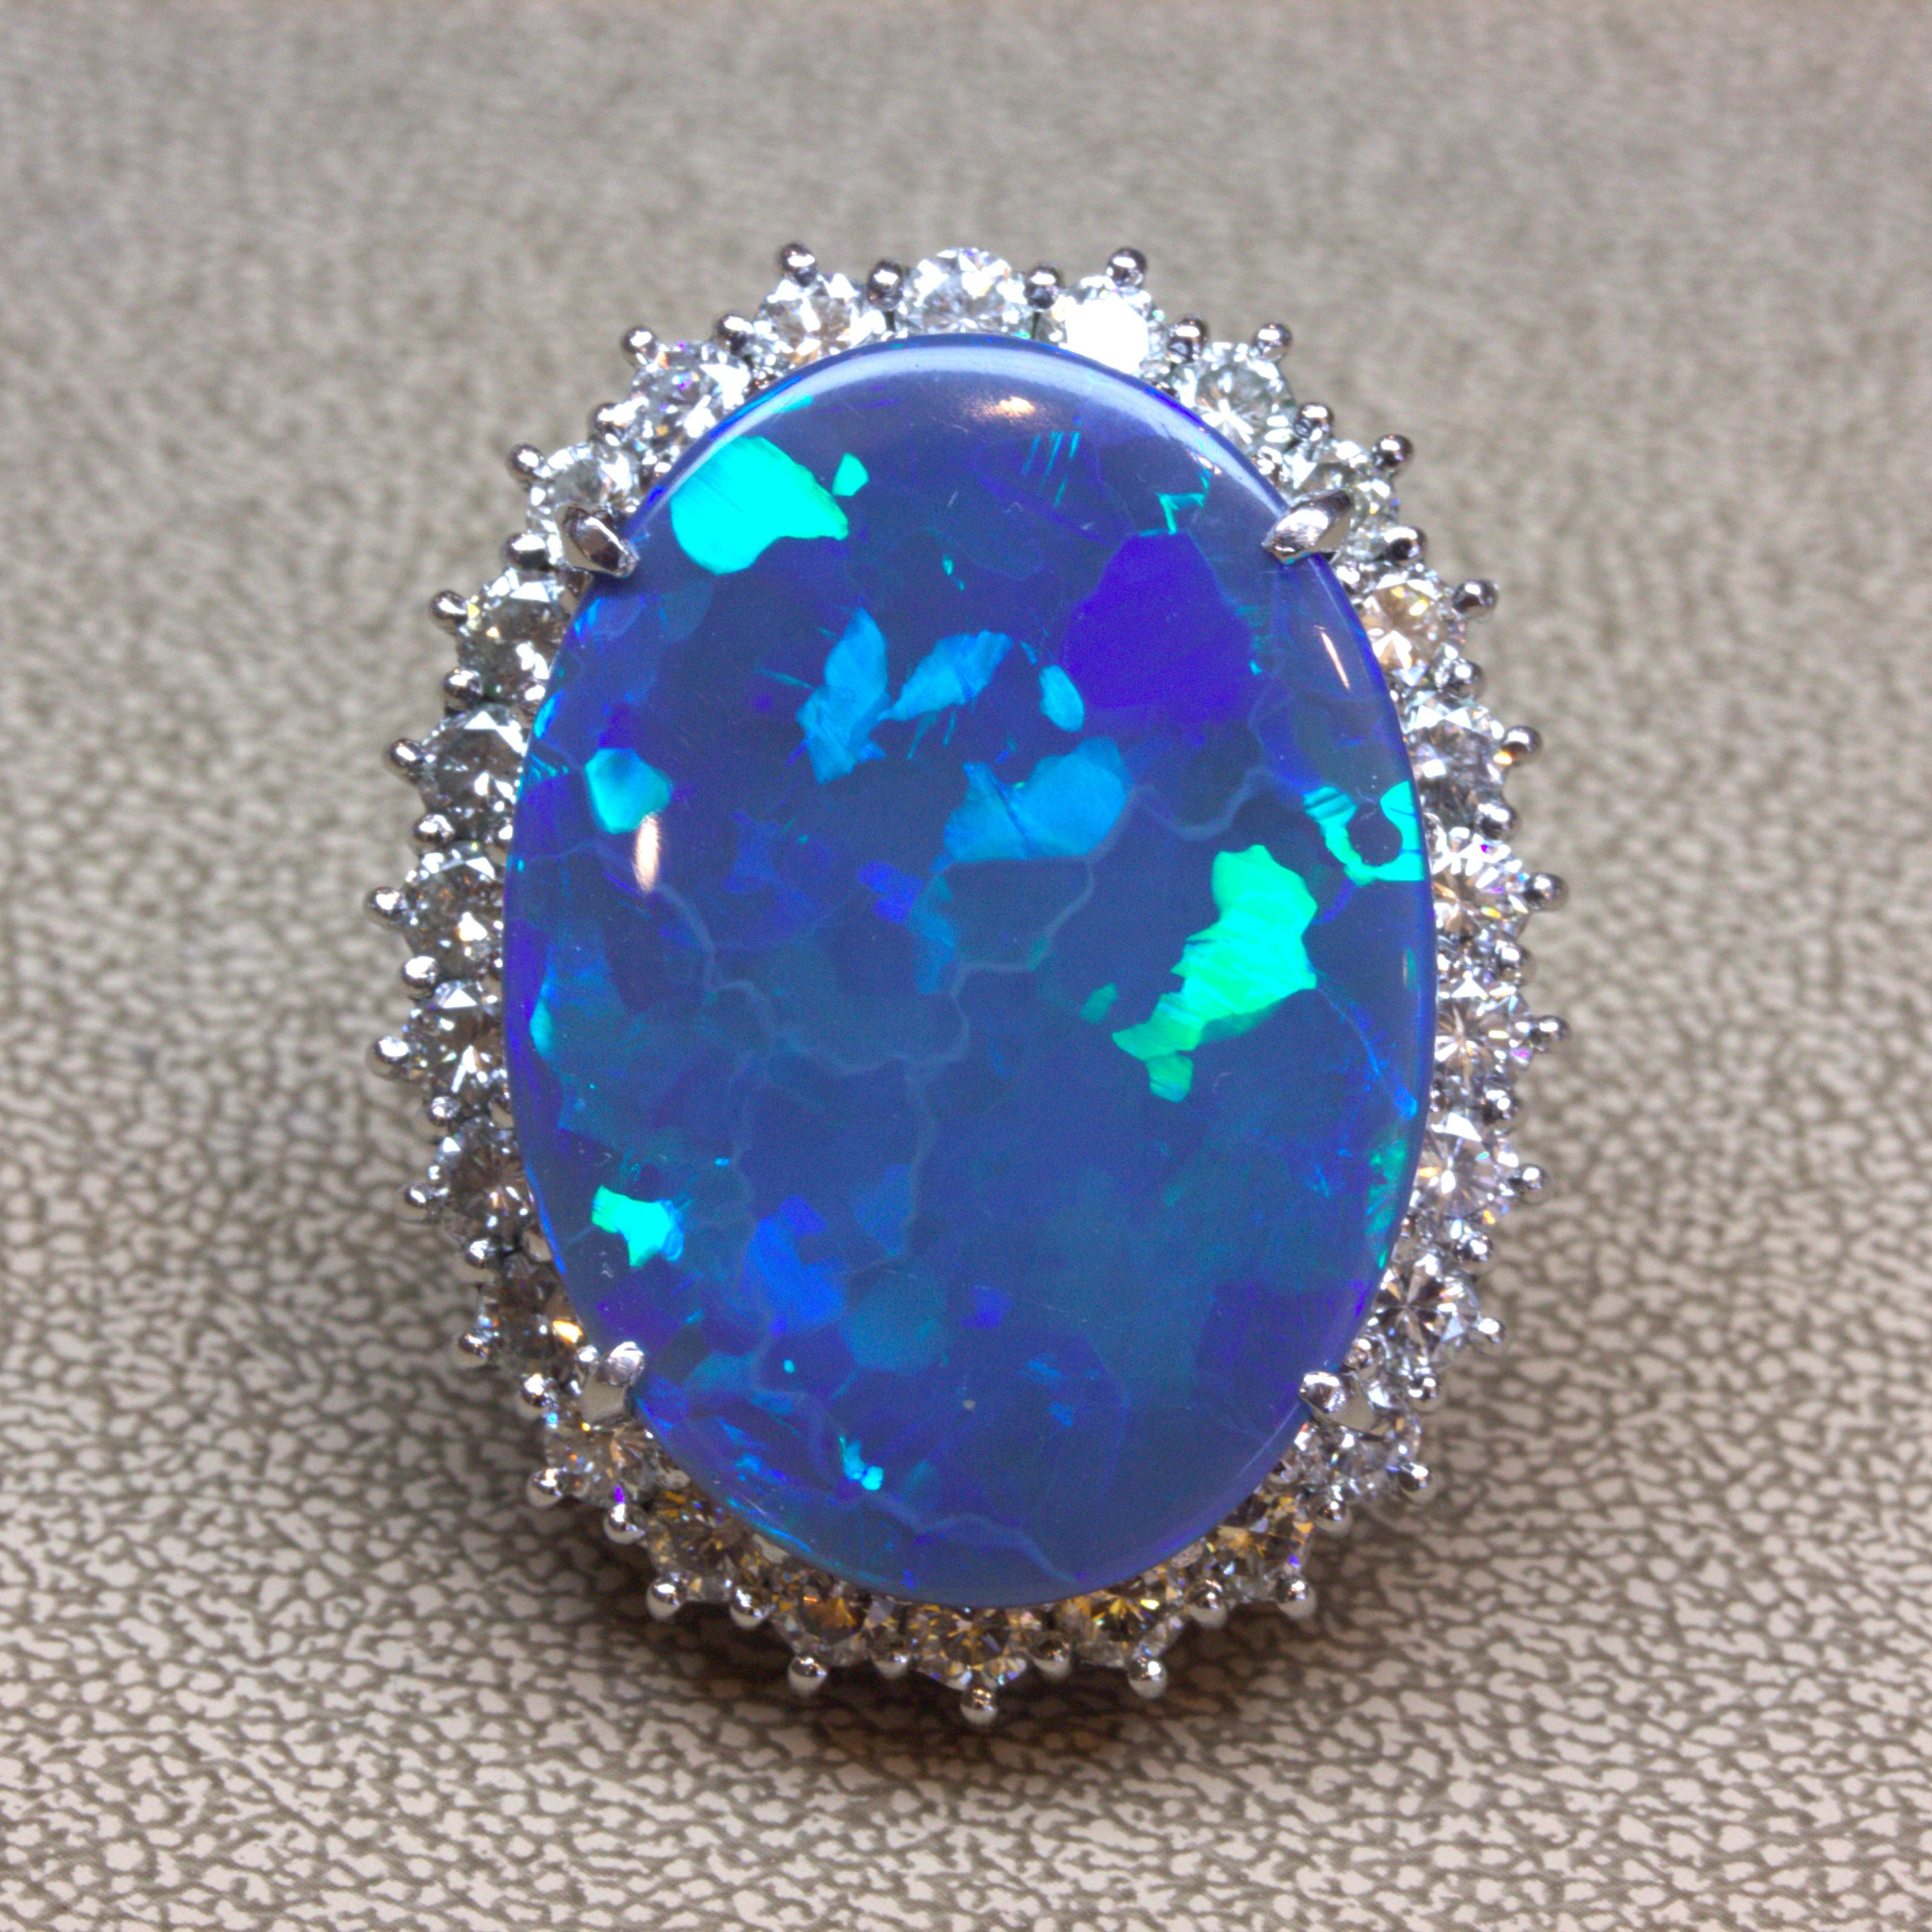 Simply breath-taking! Weighing in at almost 25 carats, this natural Australian black opal is an unbelievable treasure. Not only does it possess a very high carat weight, but it also has very strong play-of-color. Large and bright flashes of color,